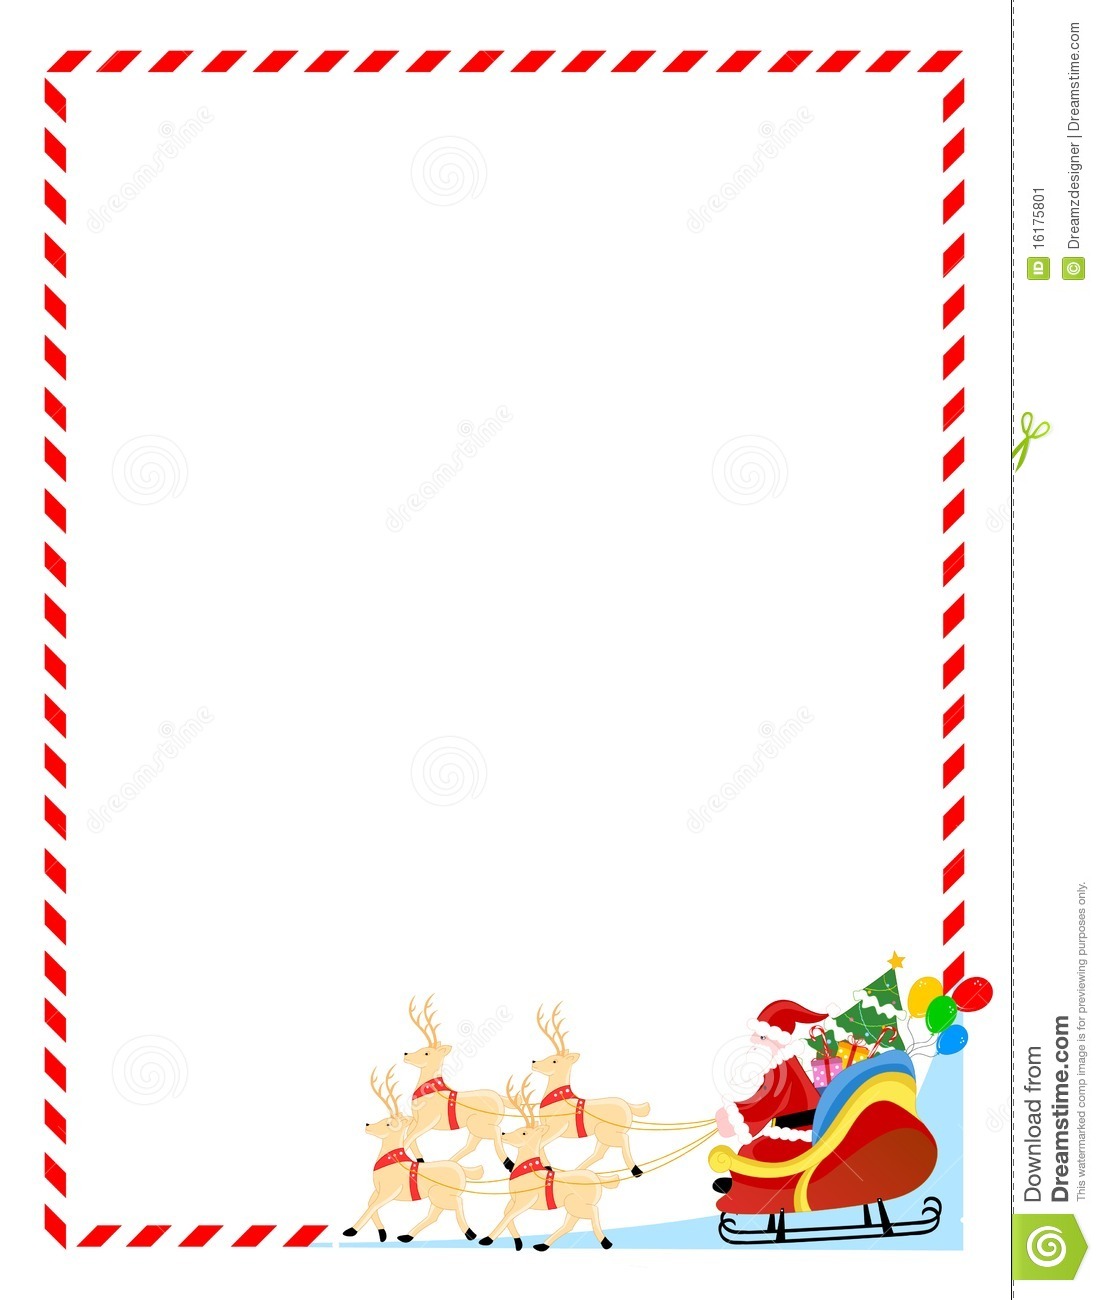 Santa Claus On A Sledge With Cute Deers Colorful Christmas Border